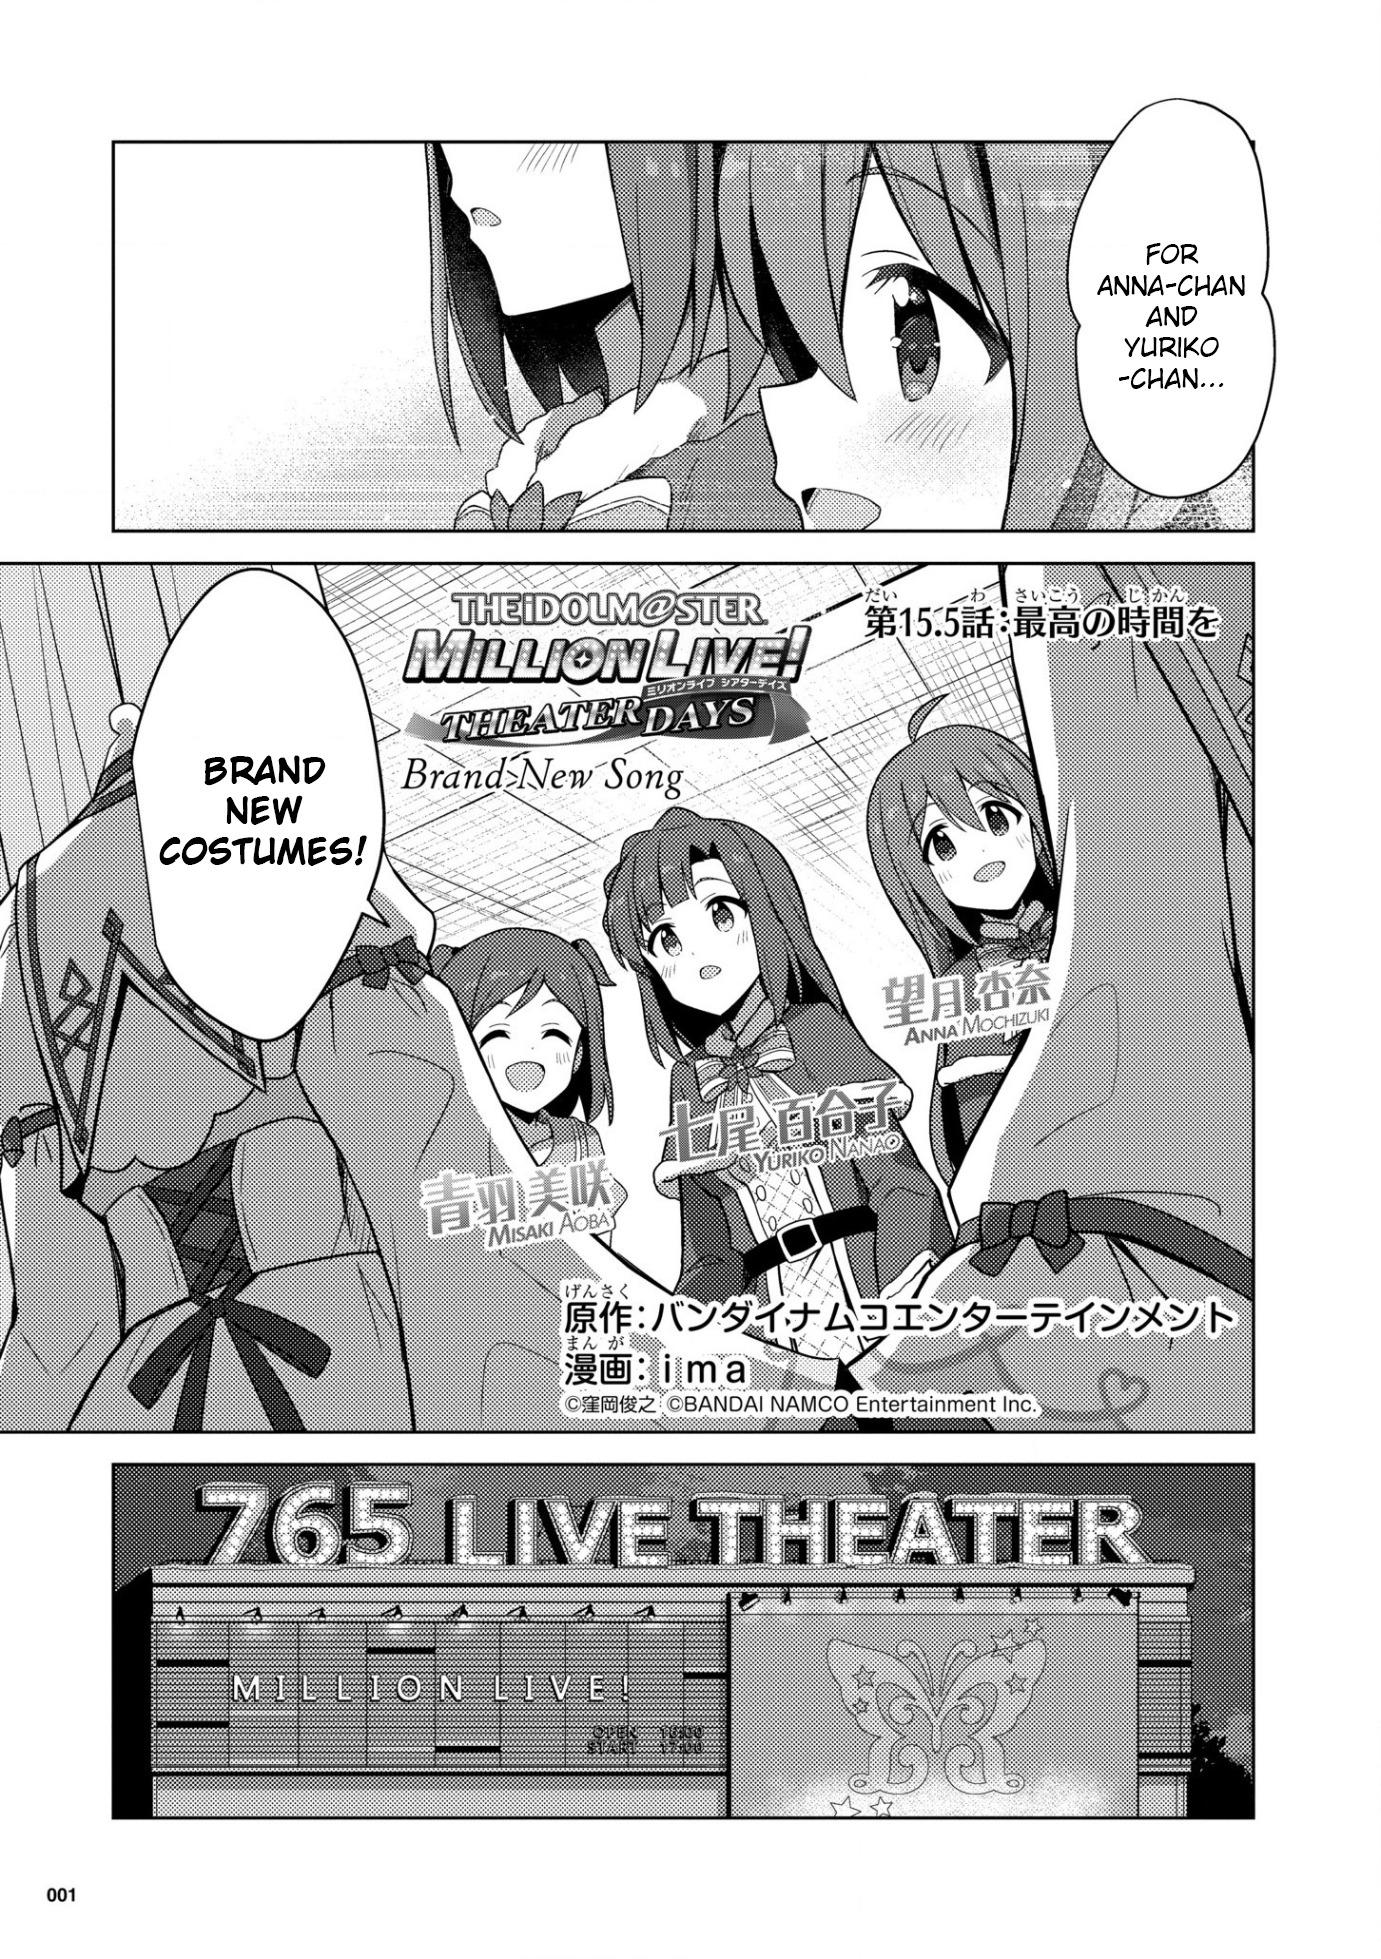 THE [email protected] Million Live! Theater Days - Brand New Song ch.15.5